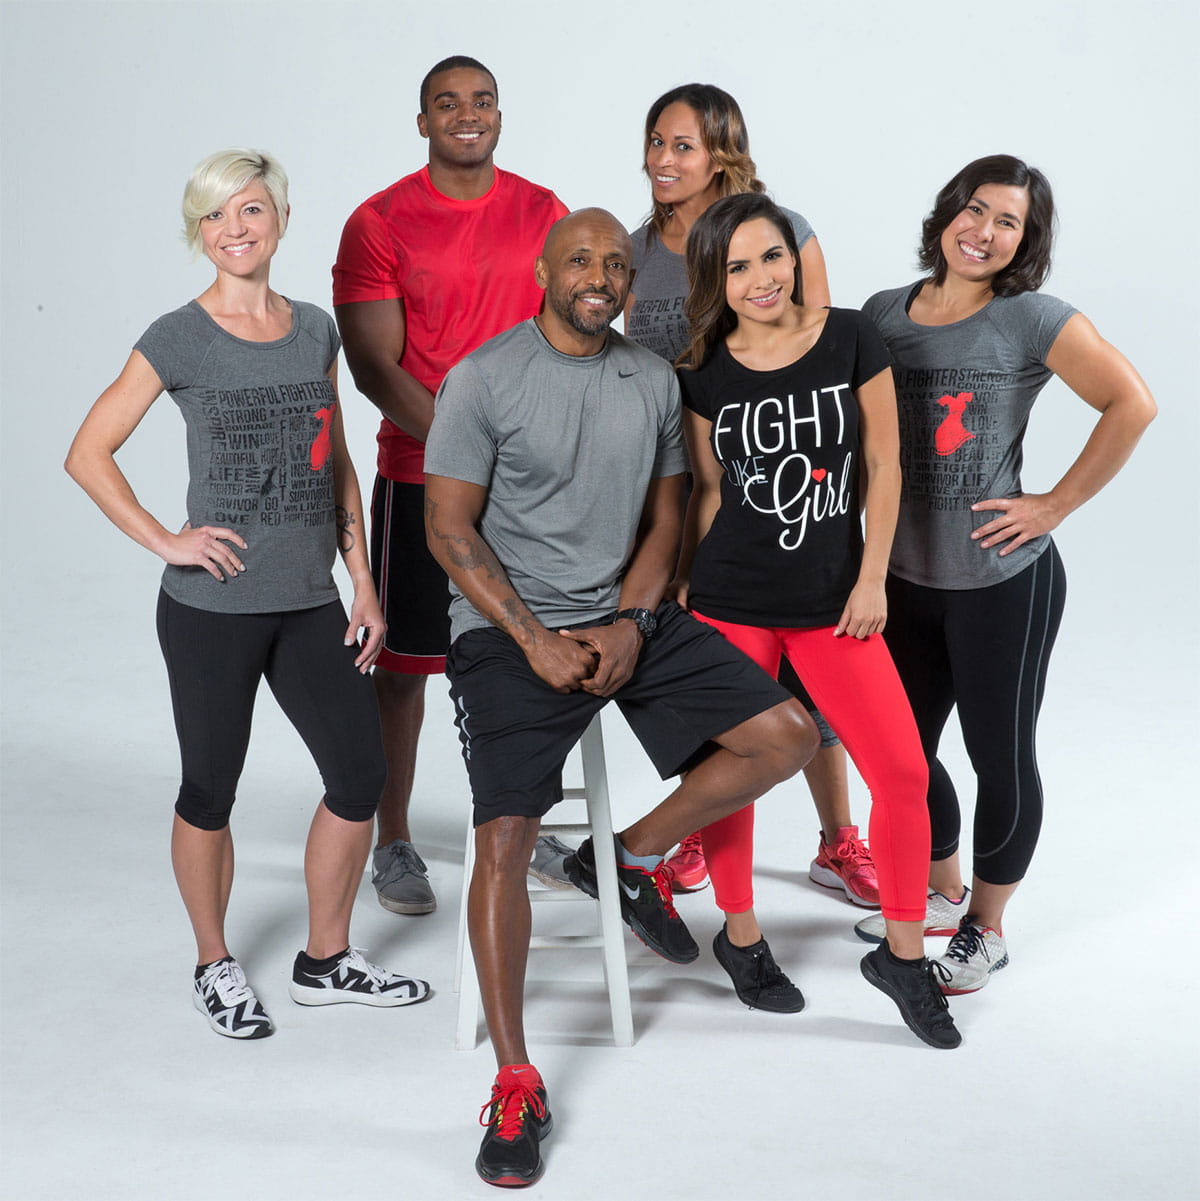 Group portrait of diverse adults in athletic attire